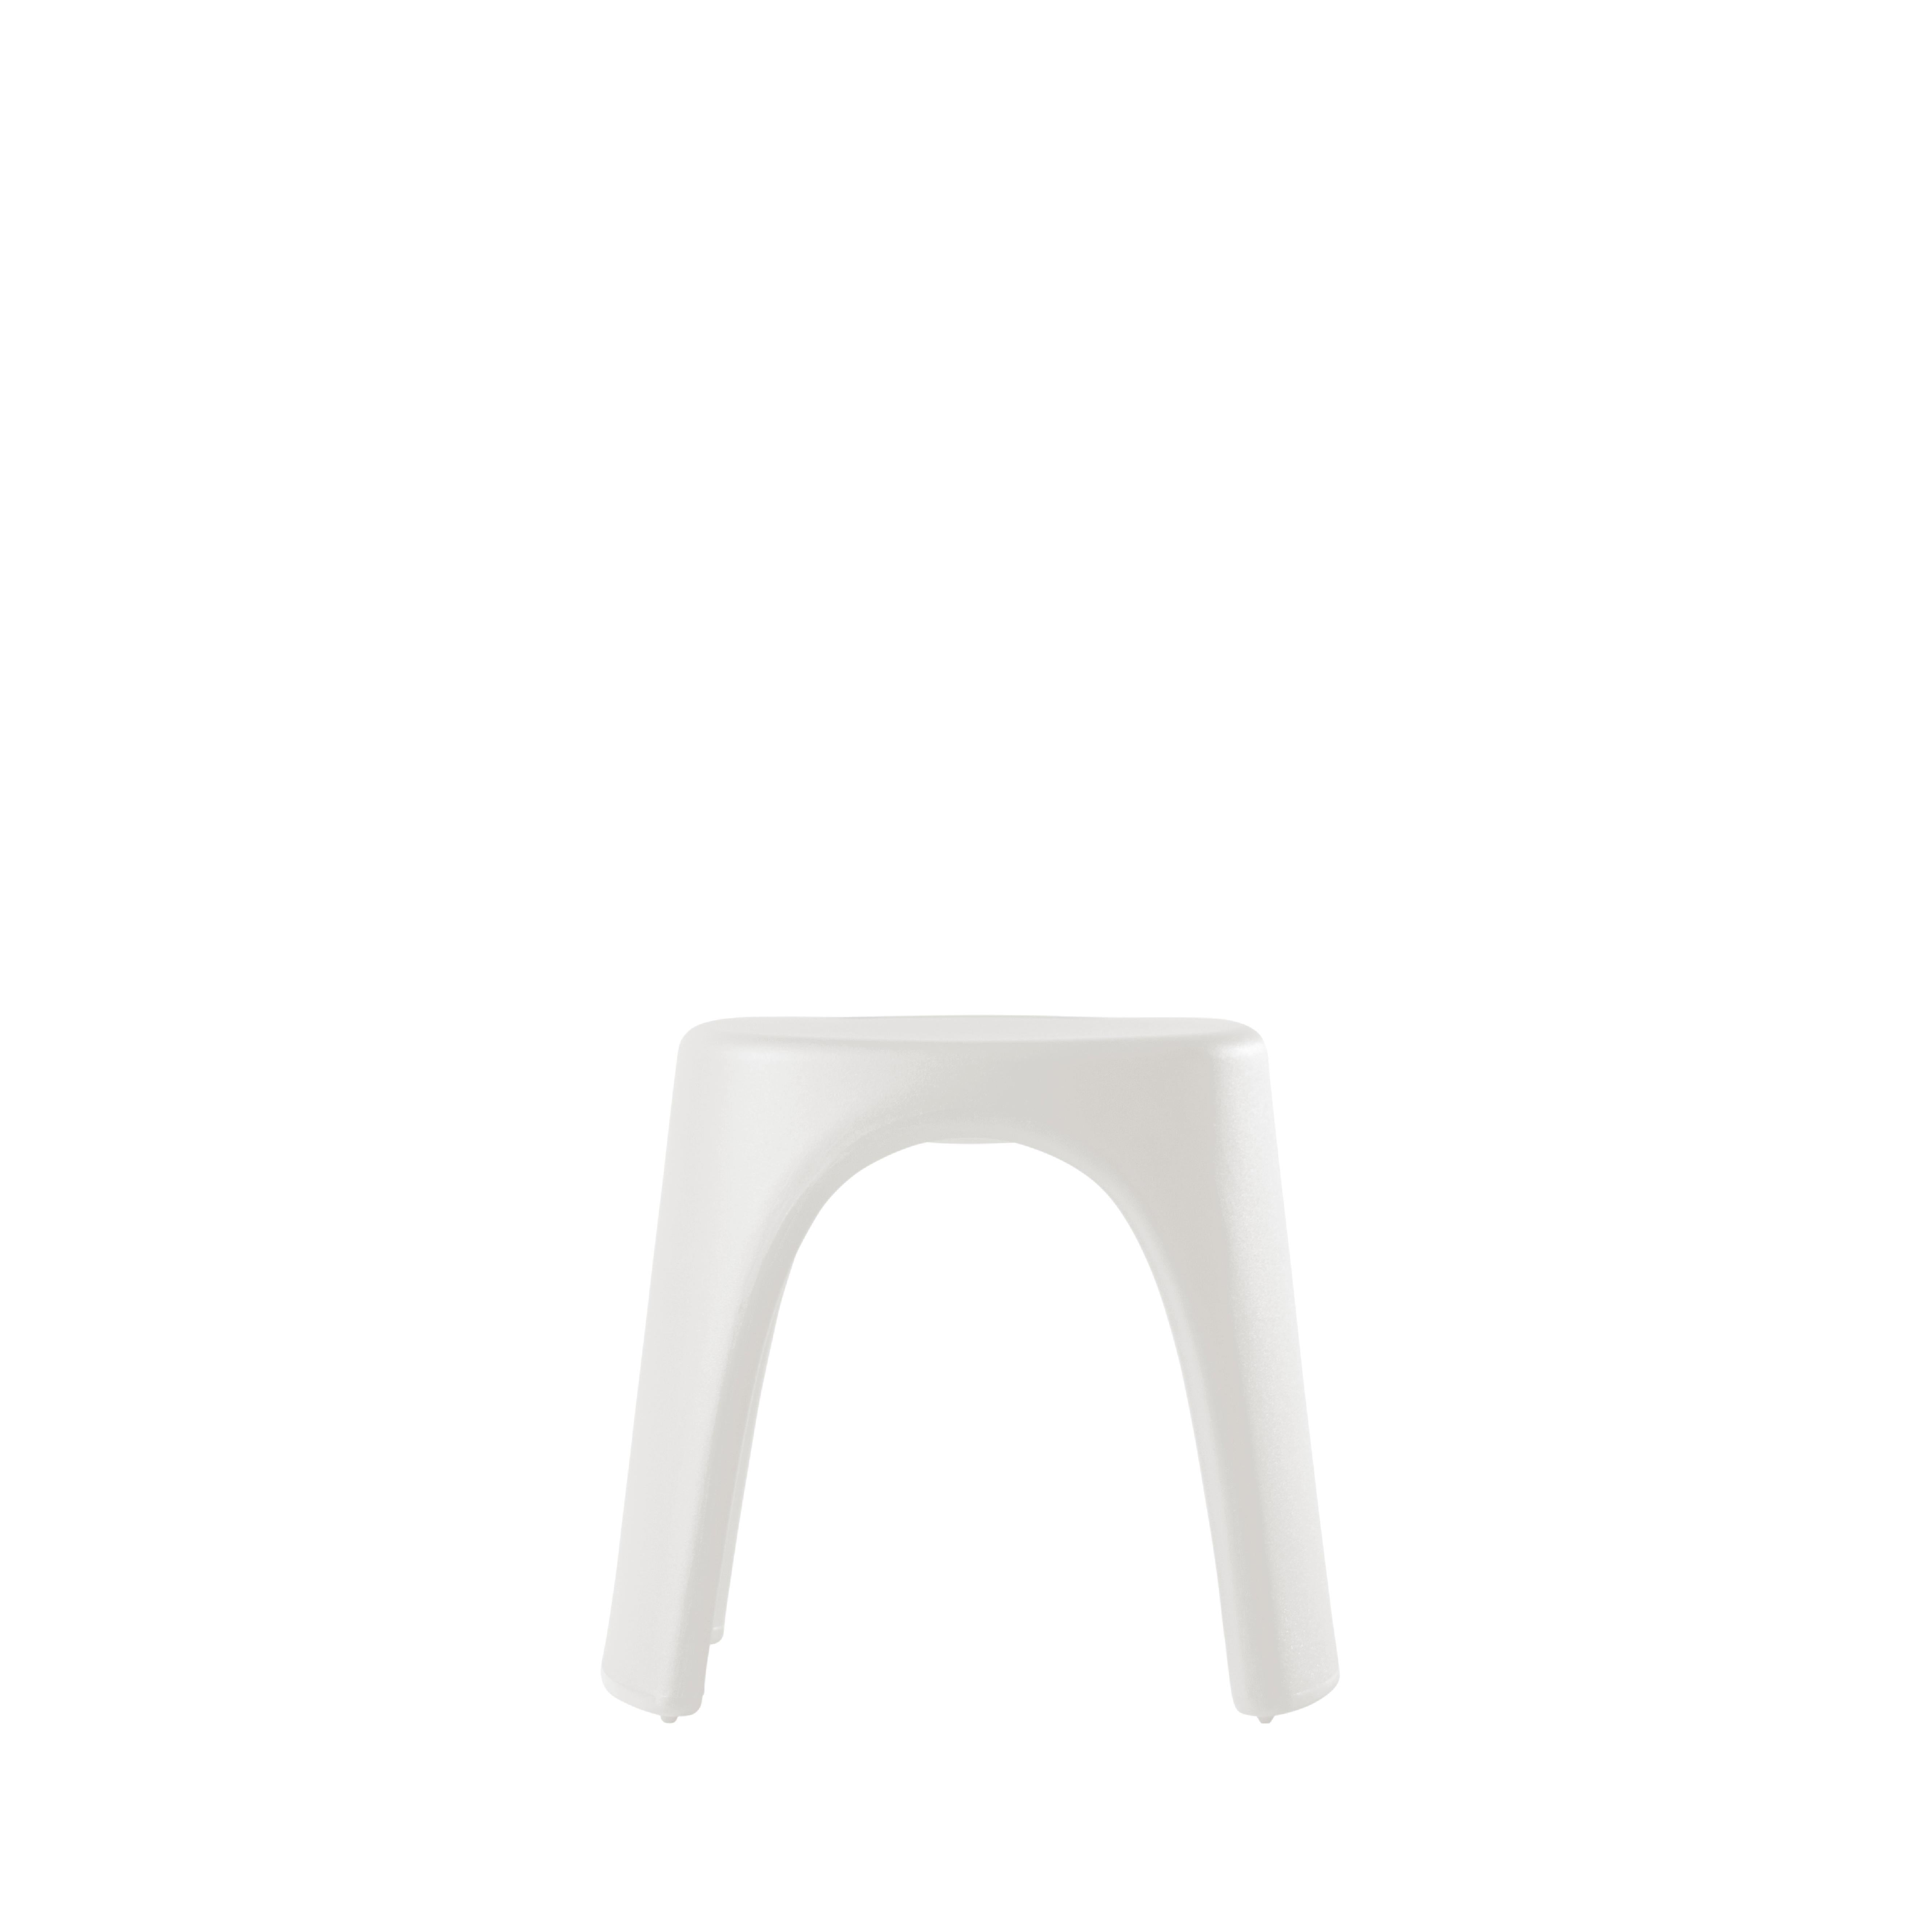 Milky White Amélie Sgabello Stool by Italo Pertichini
Dimensions: D 40 x W 46 x H 43 cm.
Materials: Polyethylene.
Weight: 4 kg.

Available in a standard version and lacquered version. Prices may vary. Available in different color options. This